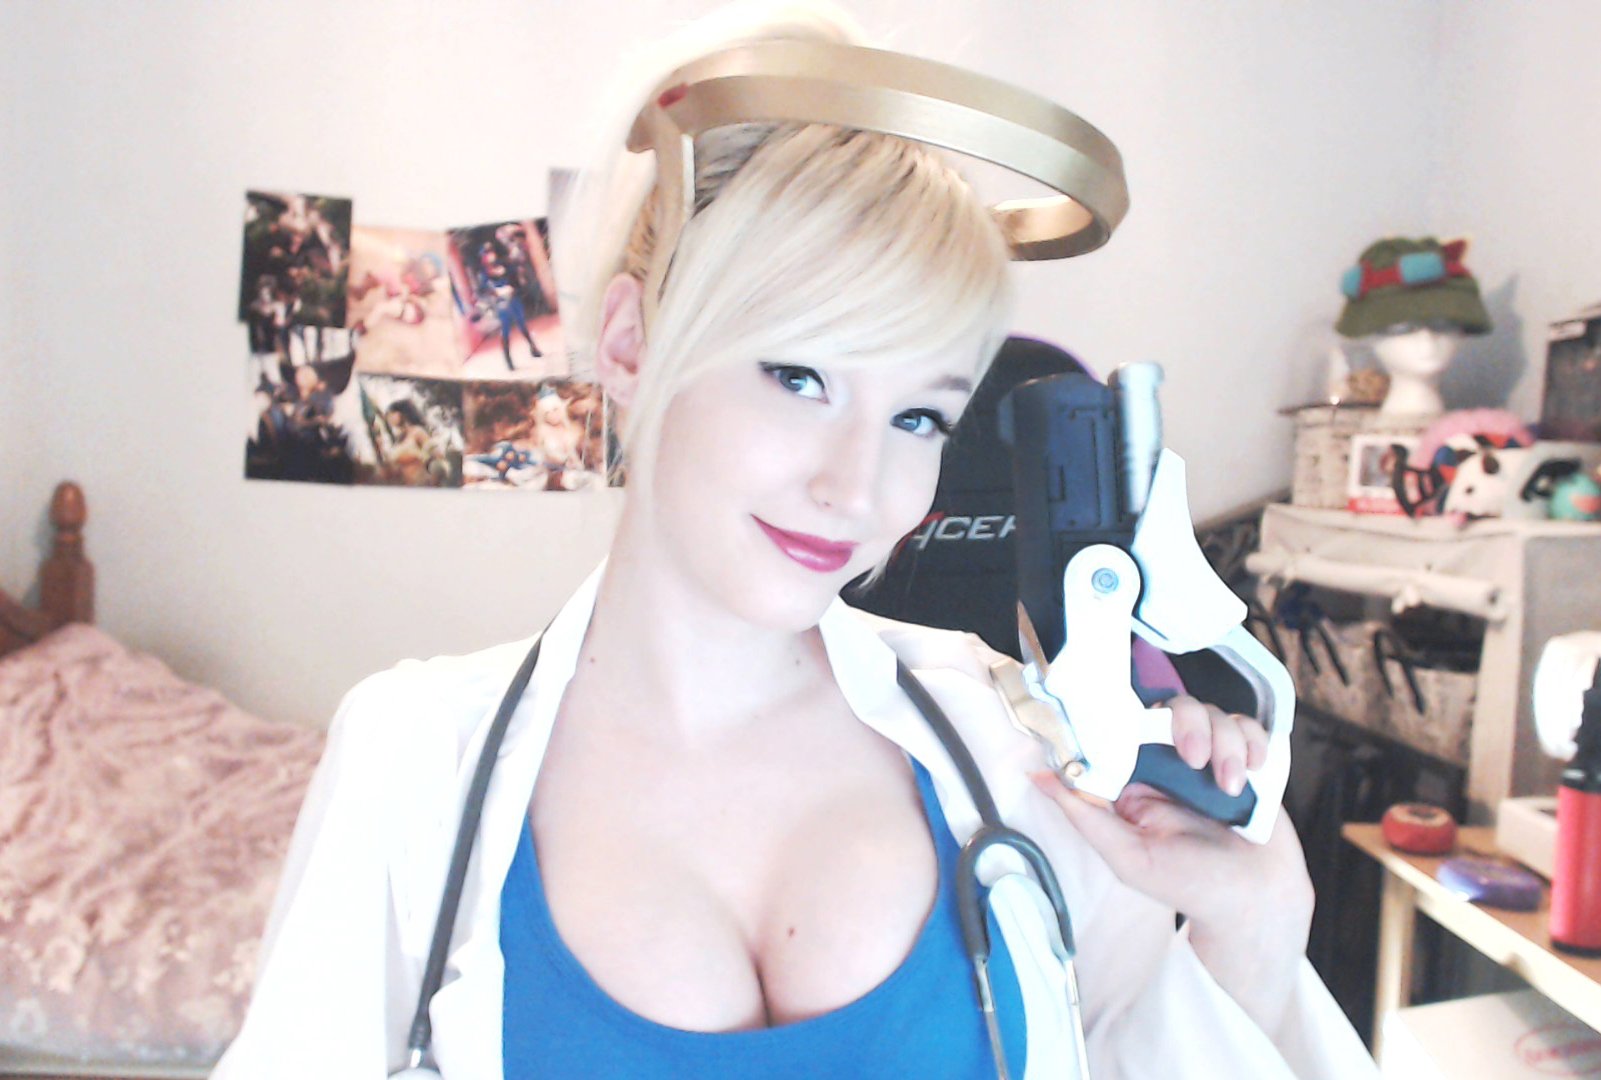 “https://t.co/gOuVmFJgUJ Doctor Mercy cosplay and some Overwatch! 